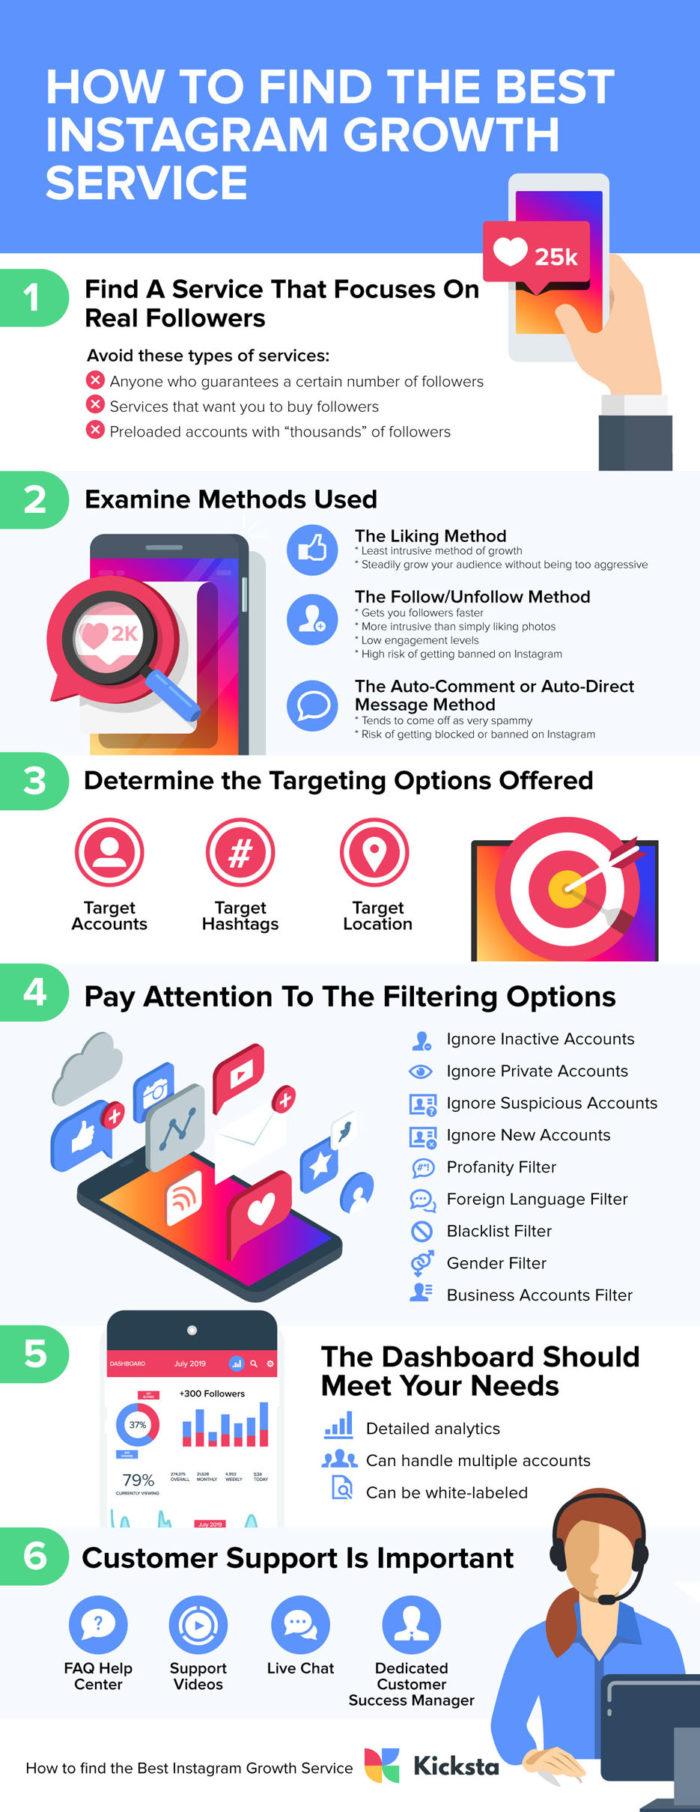 How To Find The Best Instagram Growth Service In 2019 Infographic